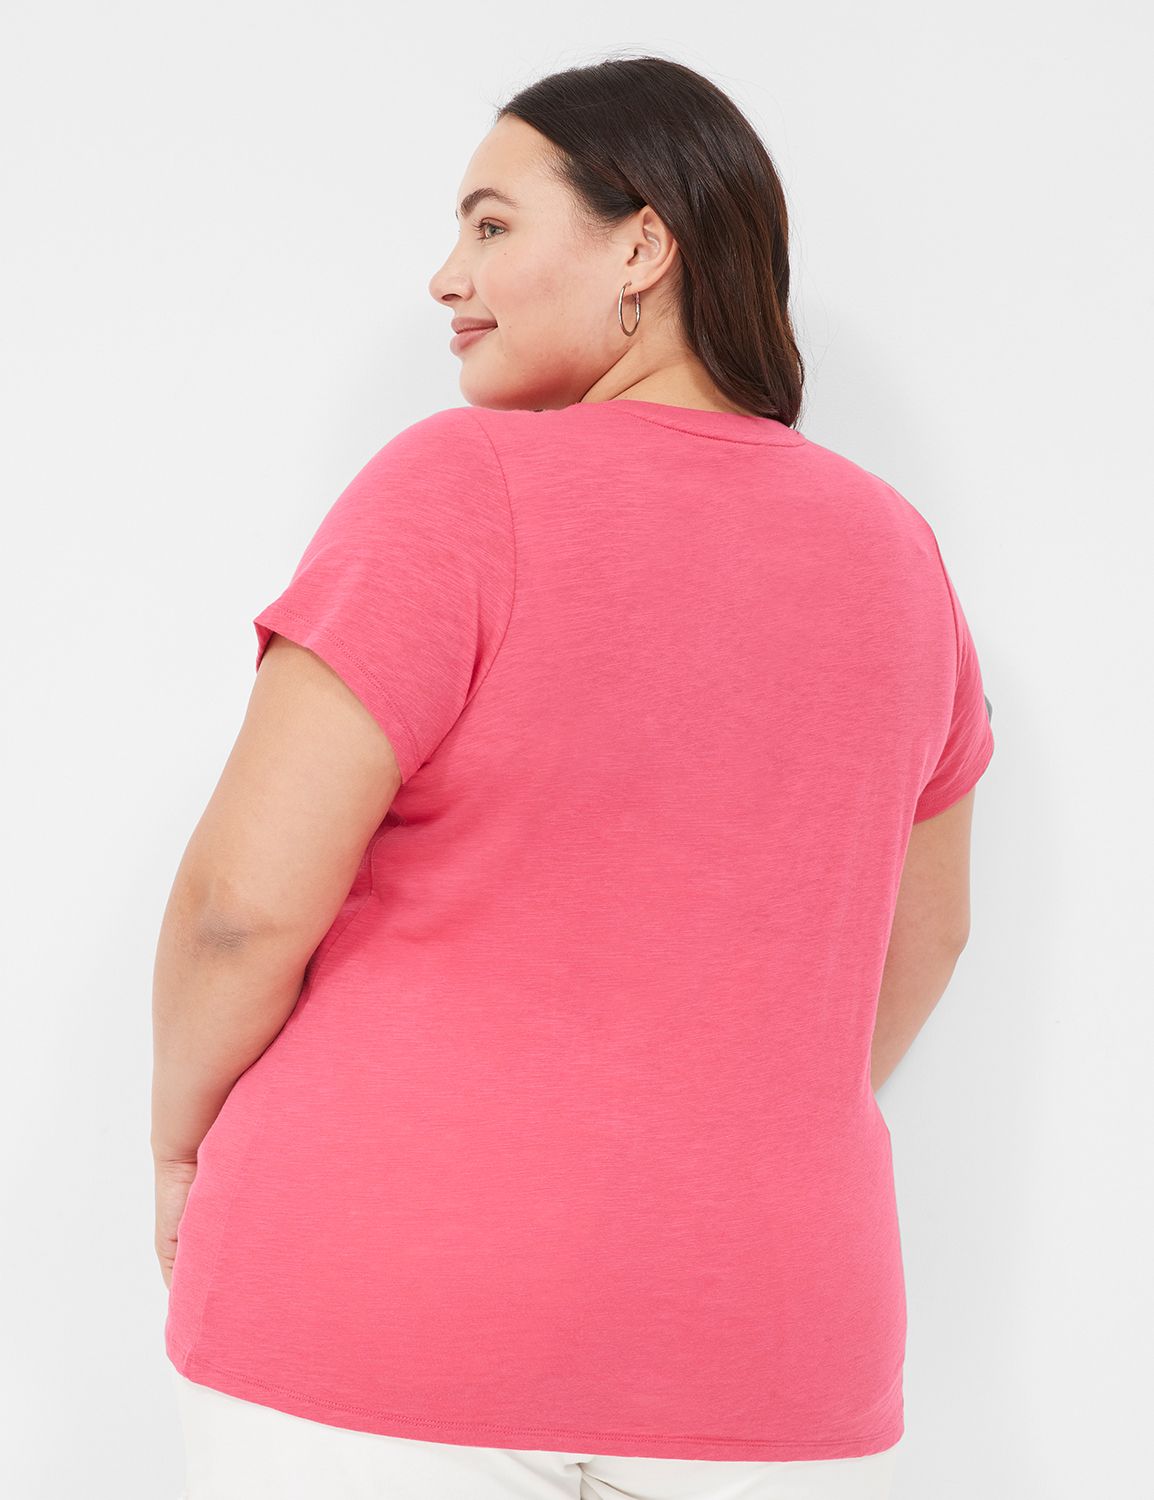 Plus Size Women's Spring Tees Collection